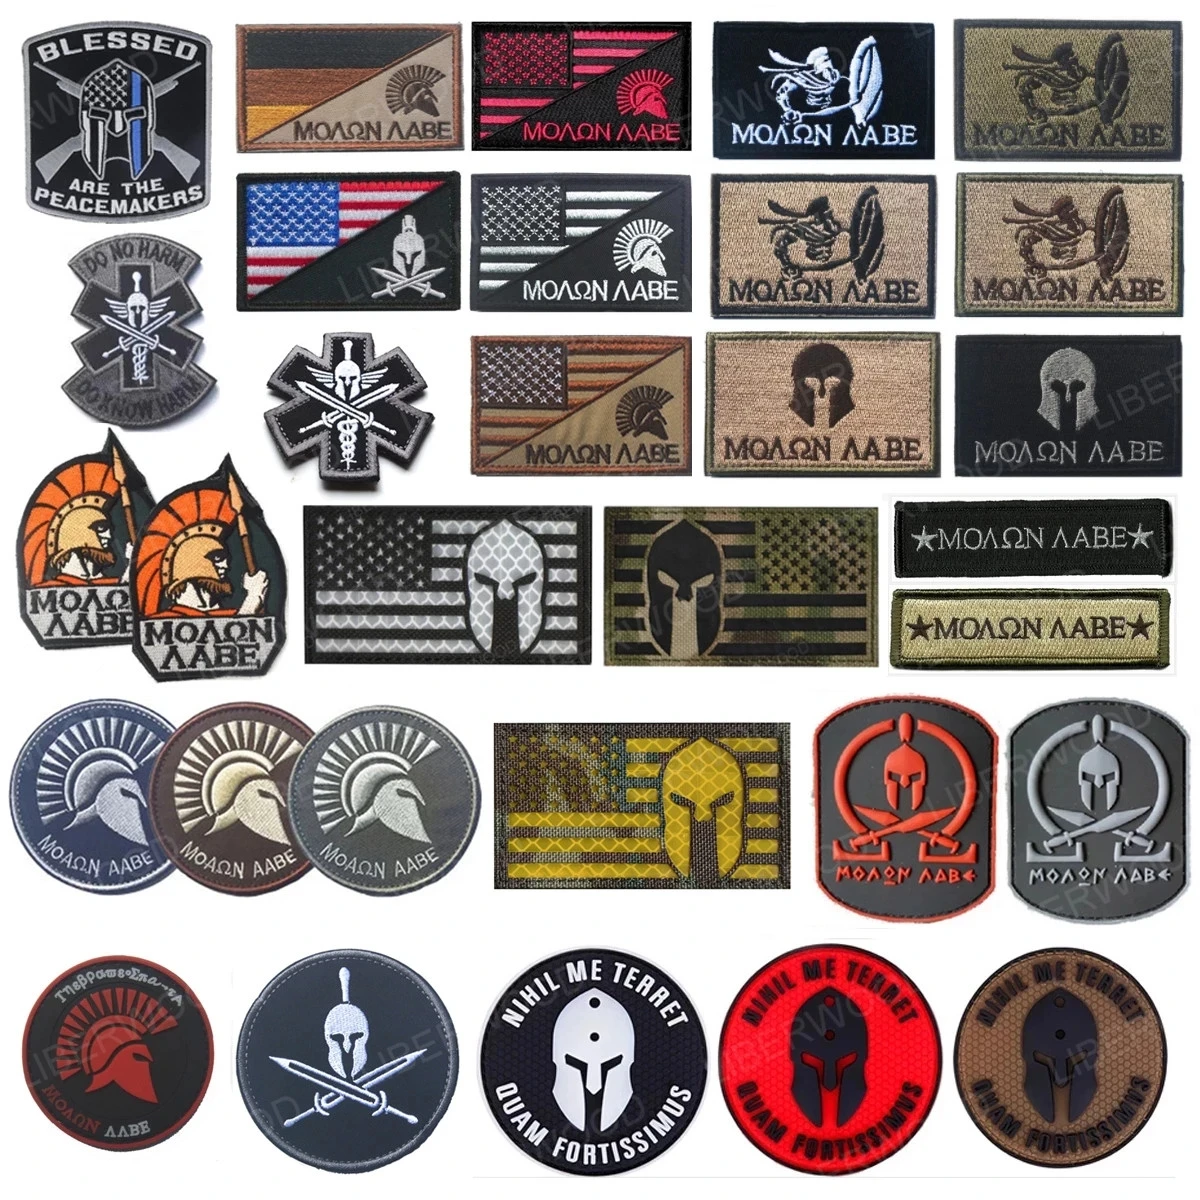 Spartan Labe Army Flag USA Tactical Warrior Embroidered Iron-On Sew patch 2Pcs 